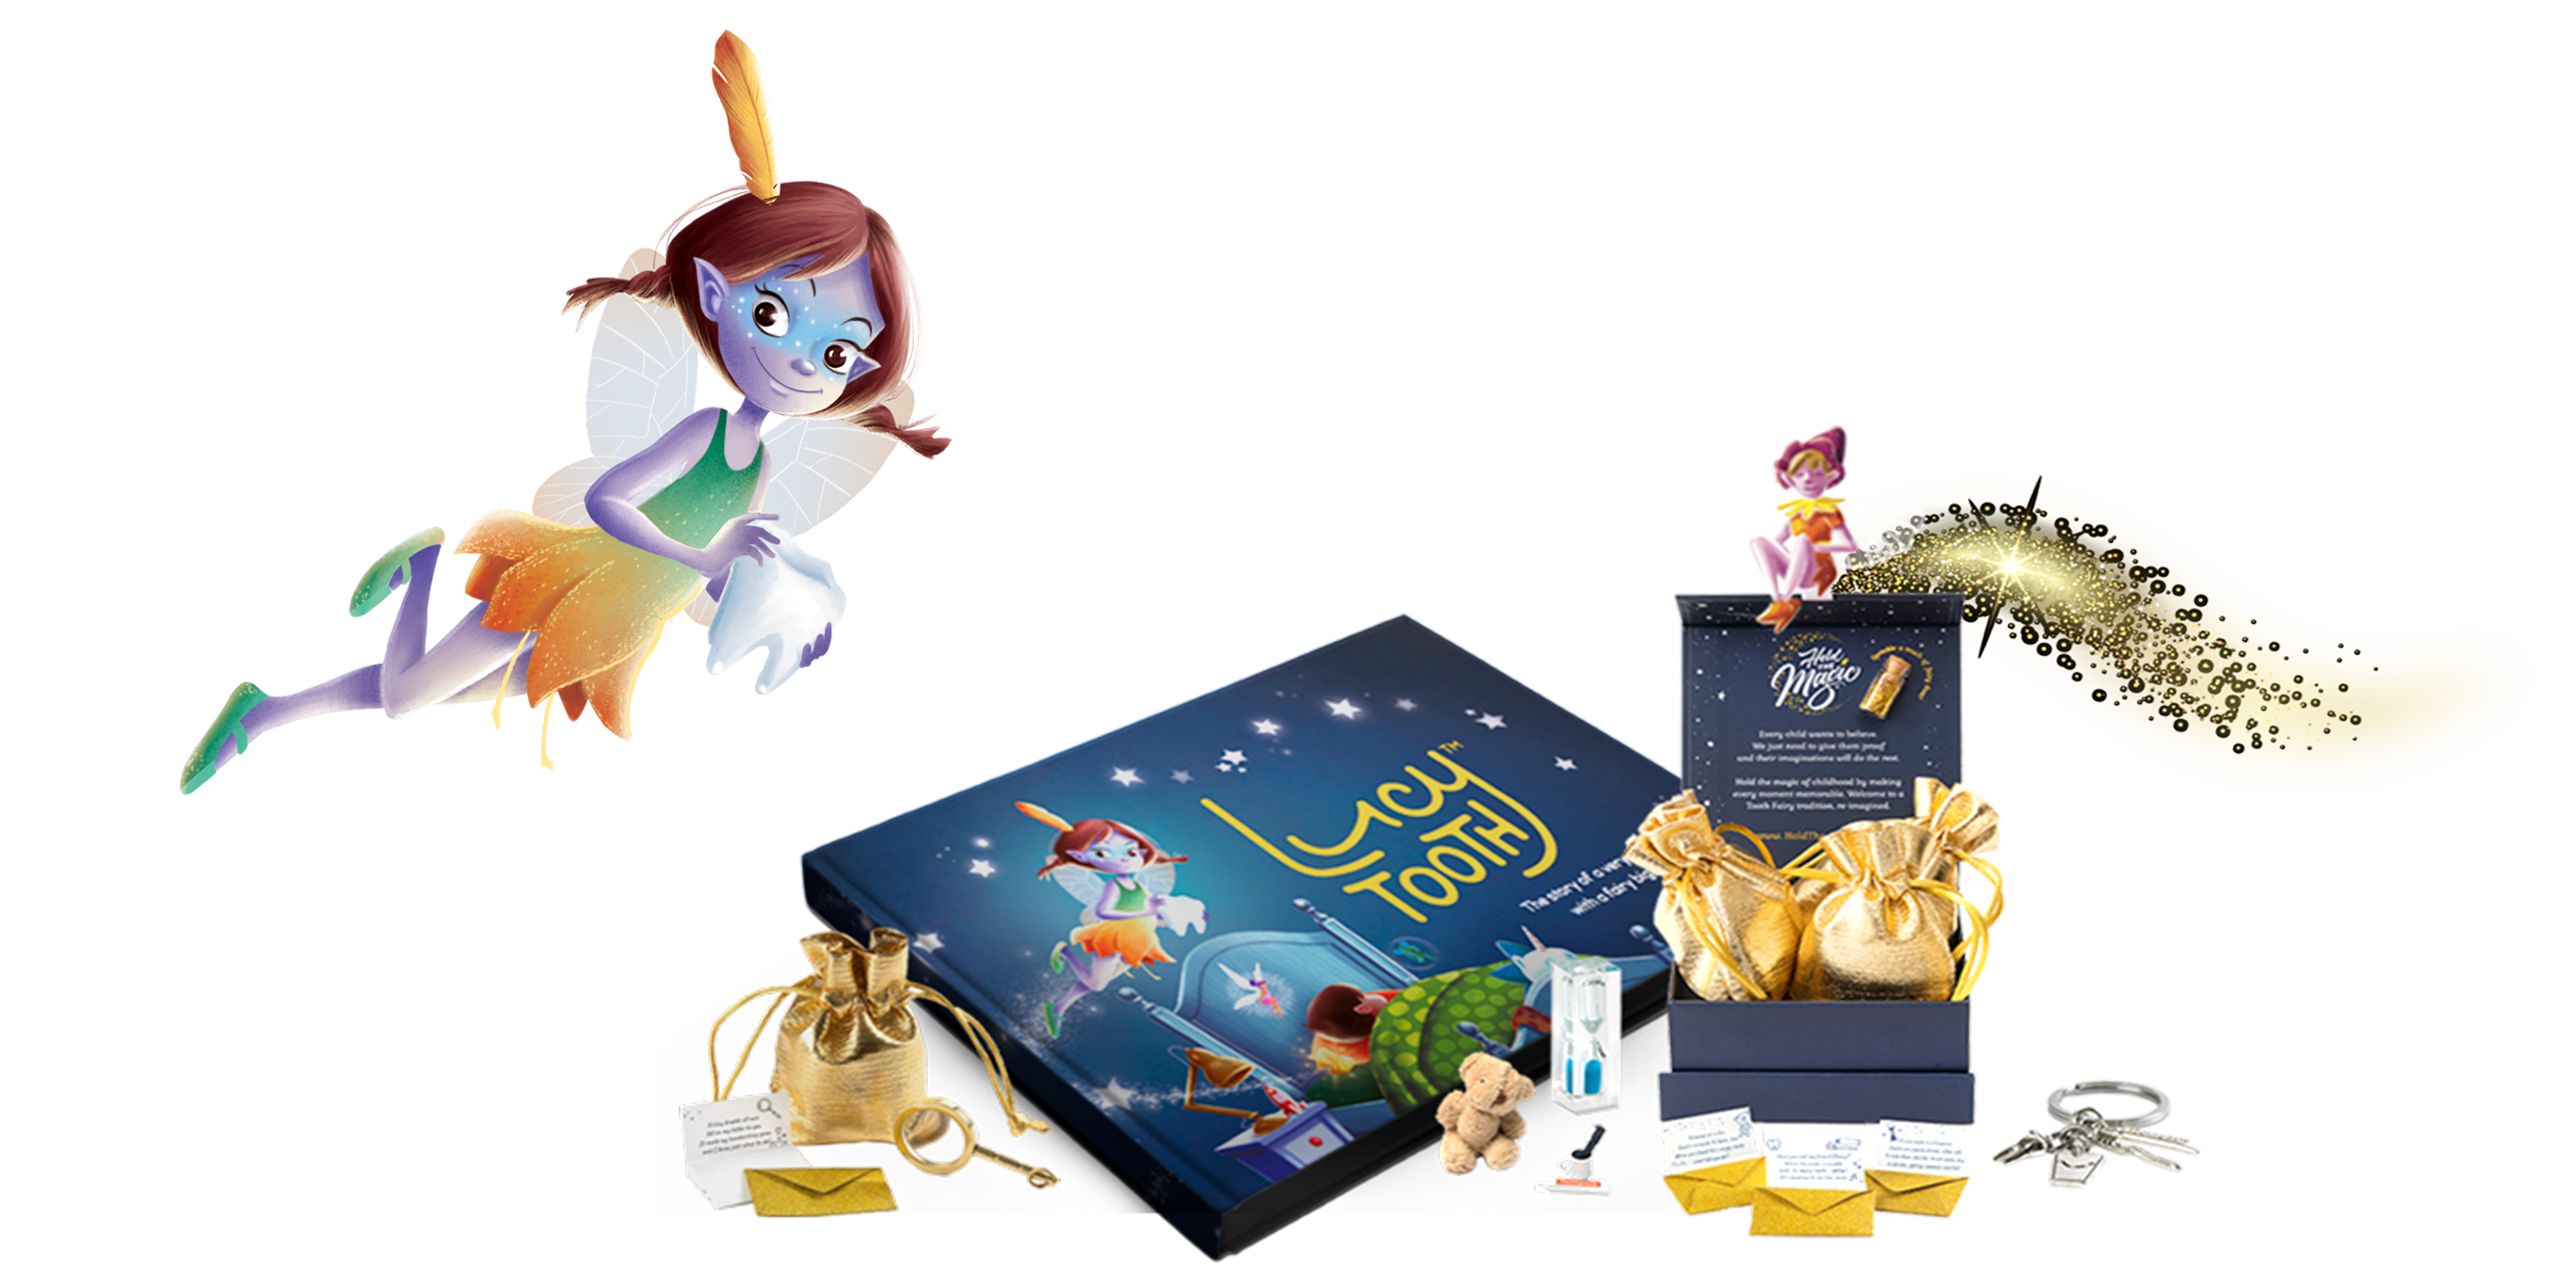 1st Wiggly Tooth